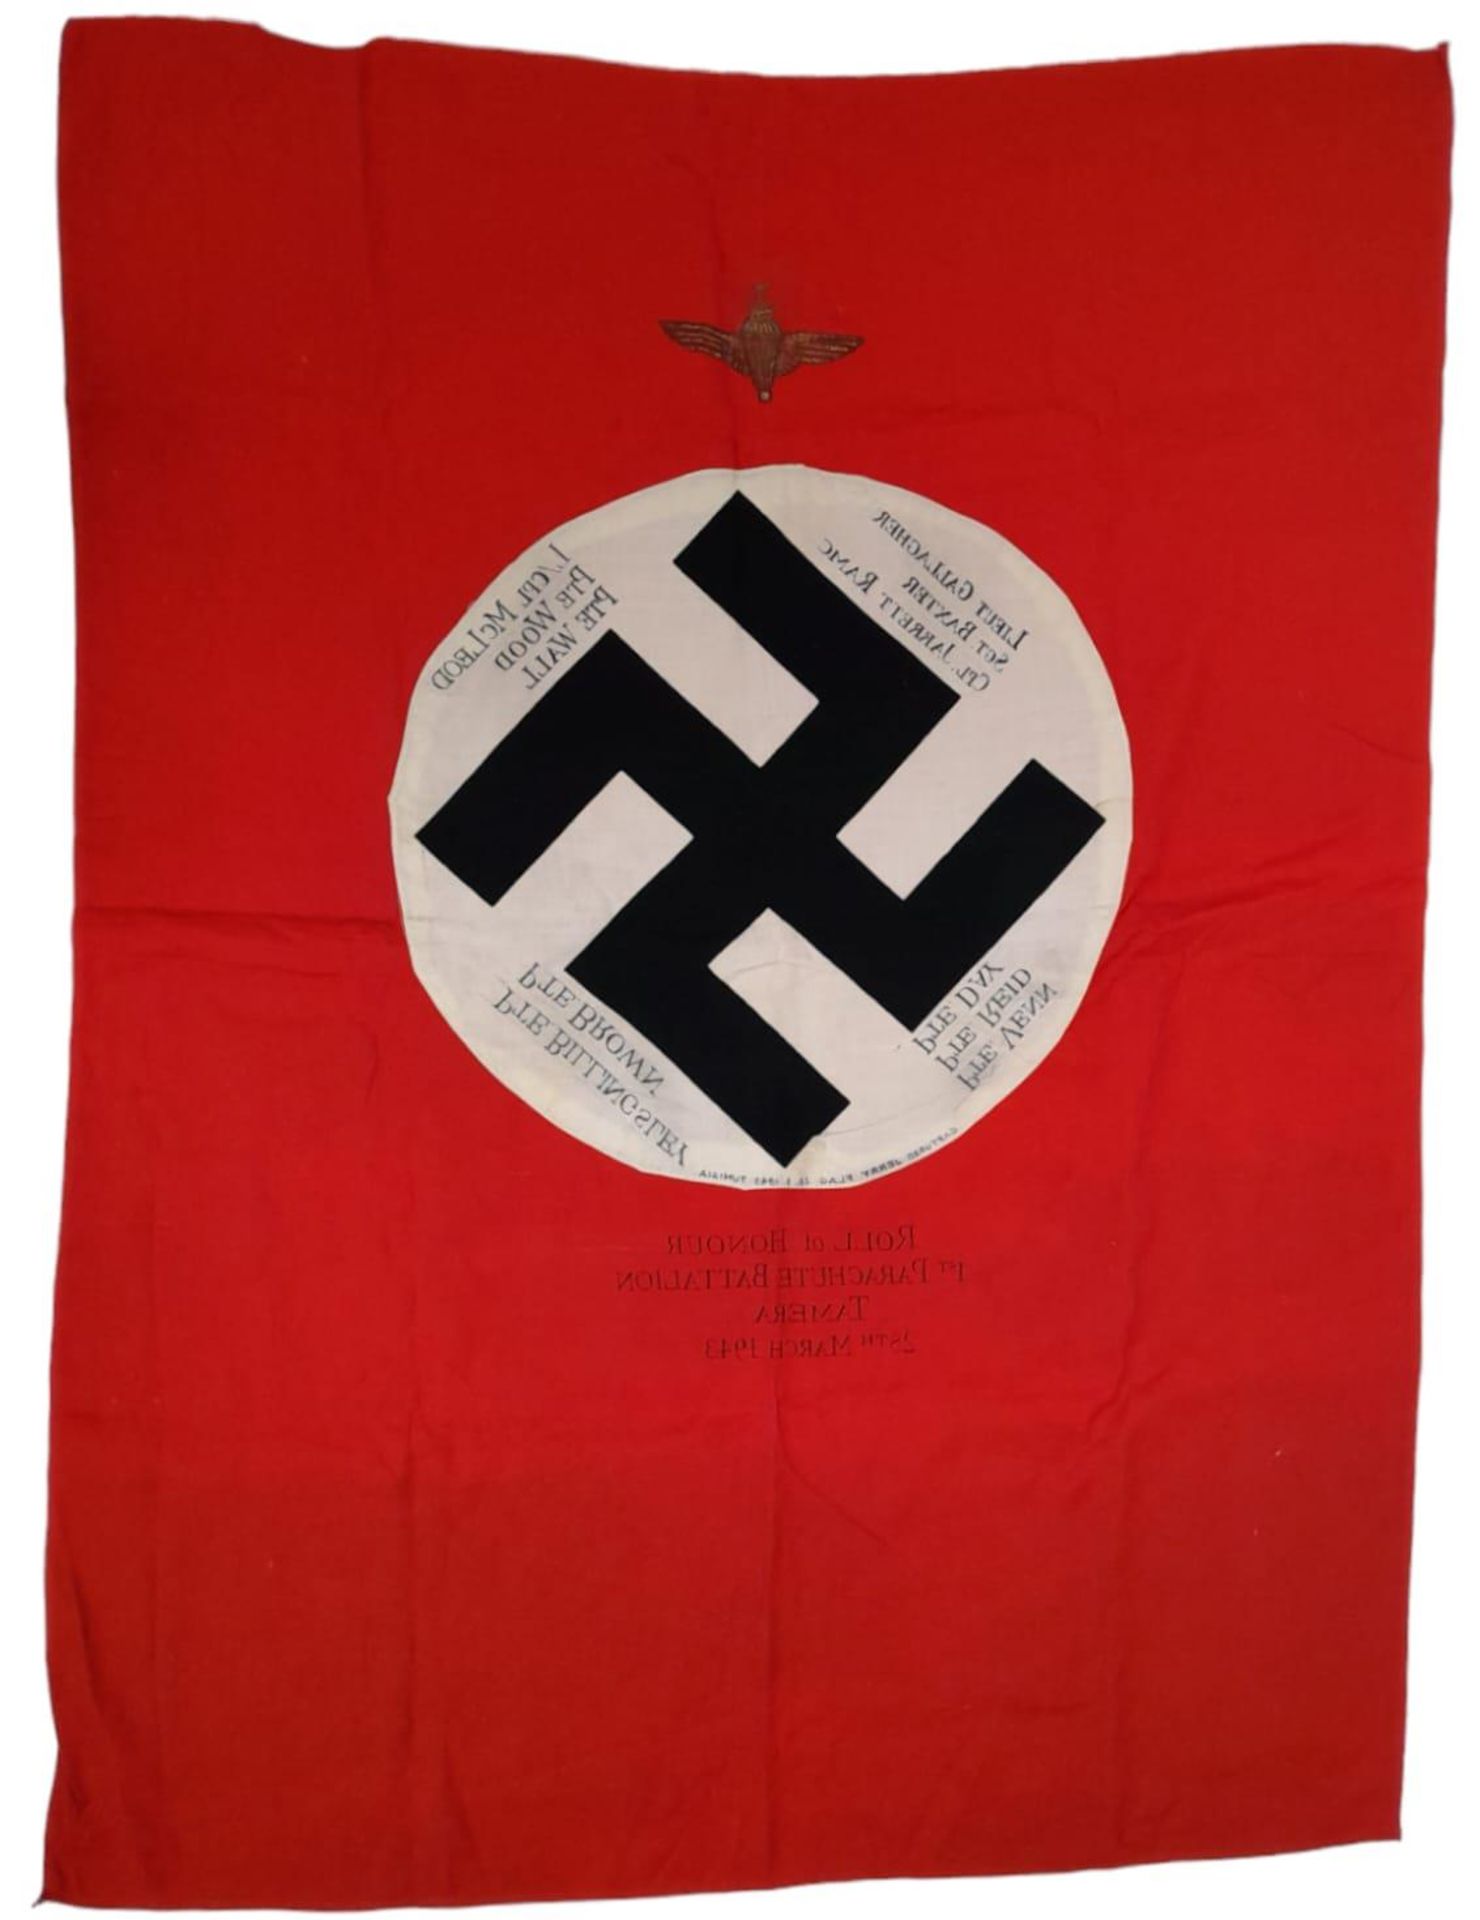 WW2 German Flag, captured in Tunisia by a British soldier in the 1 st Battalion of the Parachute